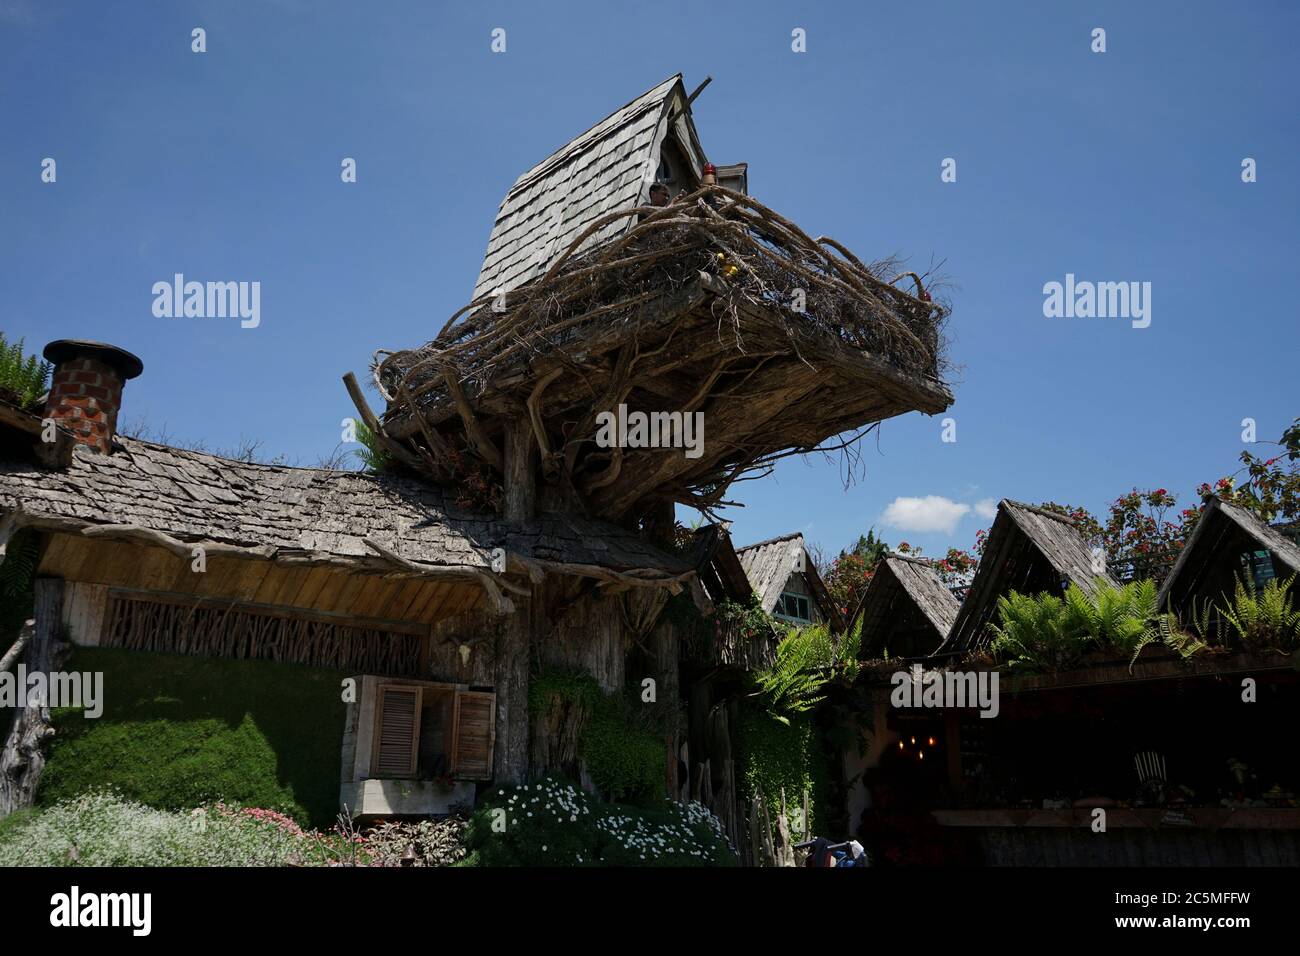 Farmhouse Susu Lembang Bandung City Indonesia Taken On September 2018 The Term Park With Hobbit House Concept In Bandung City Stock Photo Alamy